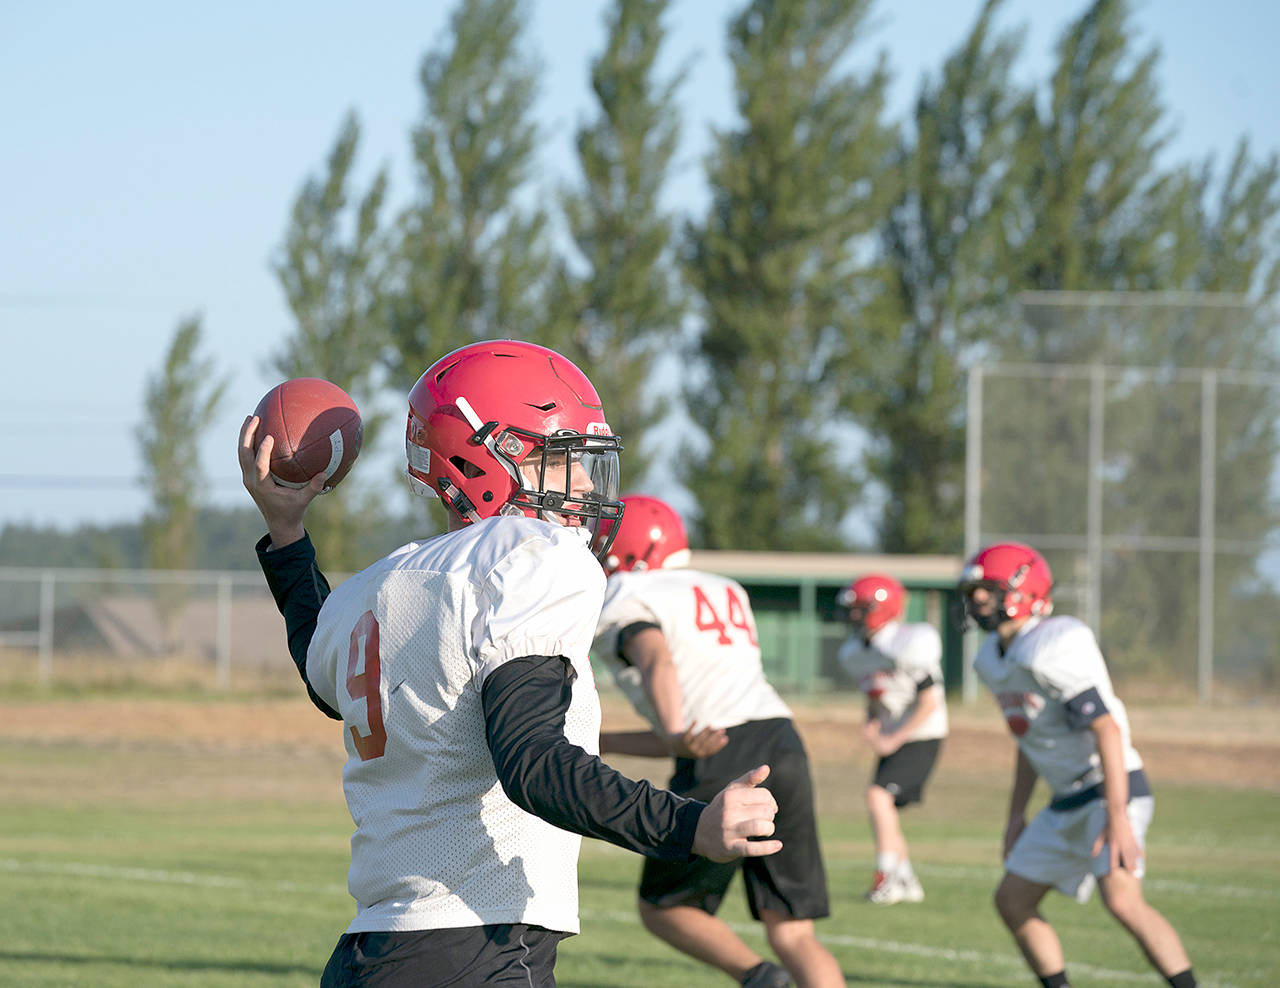 Steve Mullensky/for Peninsula Daily News Noa Apker-Montoya throws during a preseason practice last month. The Redhawks face Port Angeles tonight in their season opener.